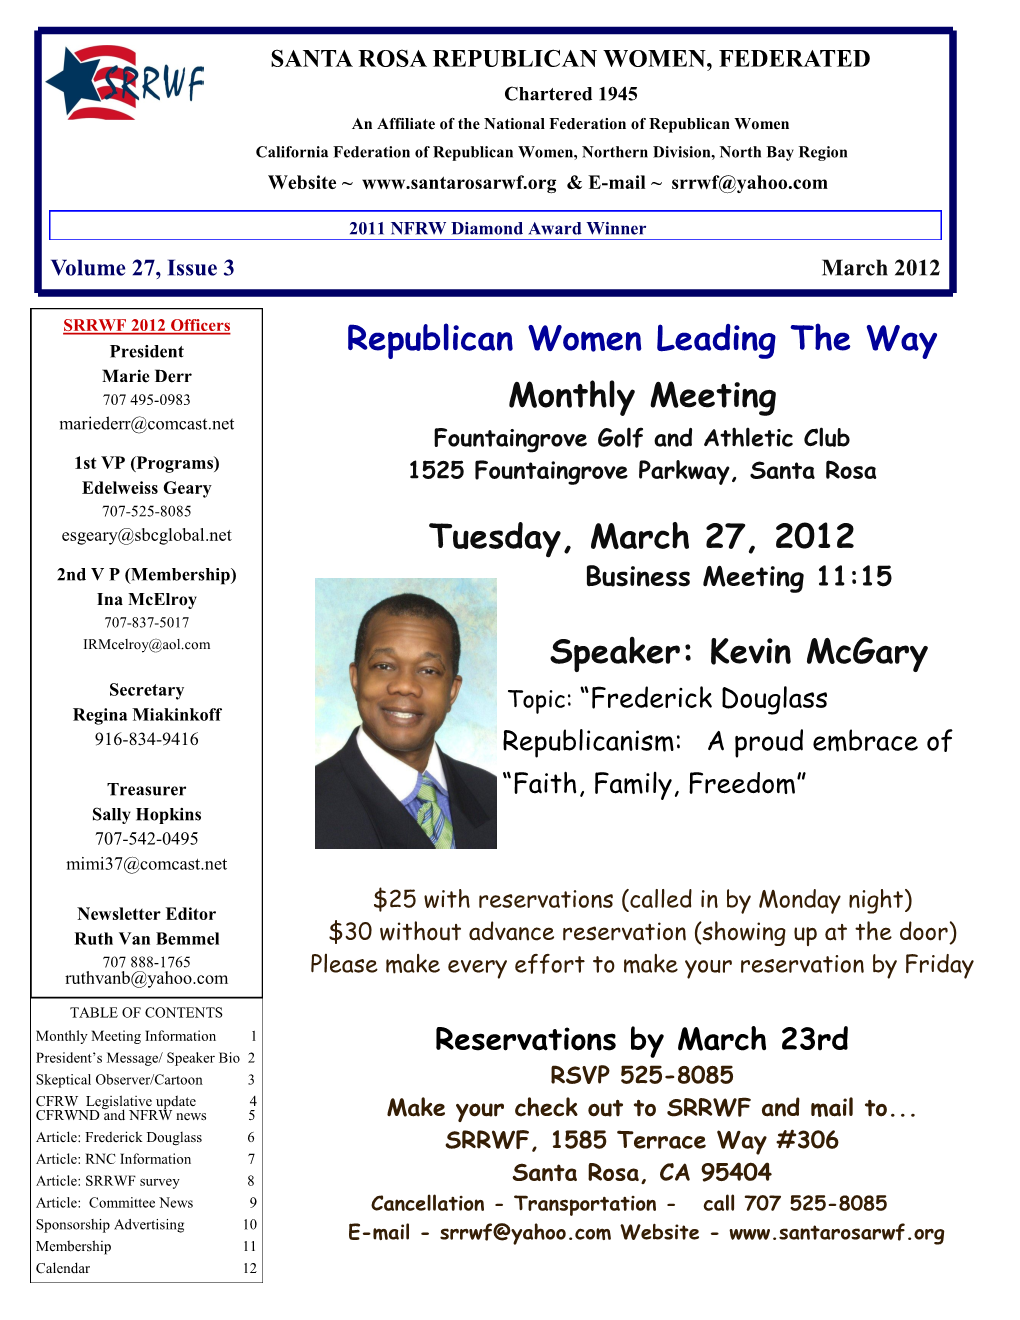 Republican Women Leading the Way Monthly Meeting Tuesday, March